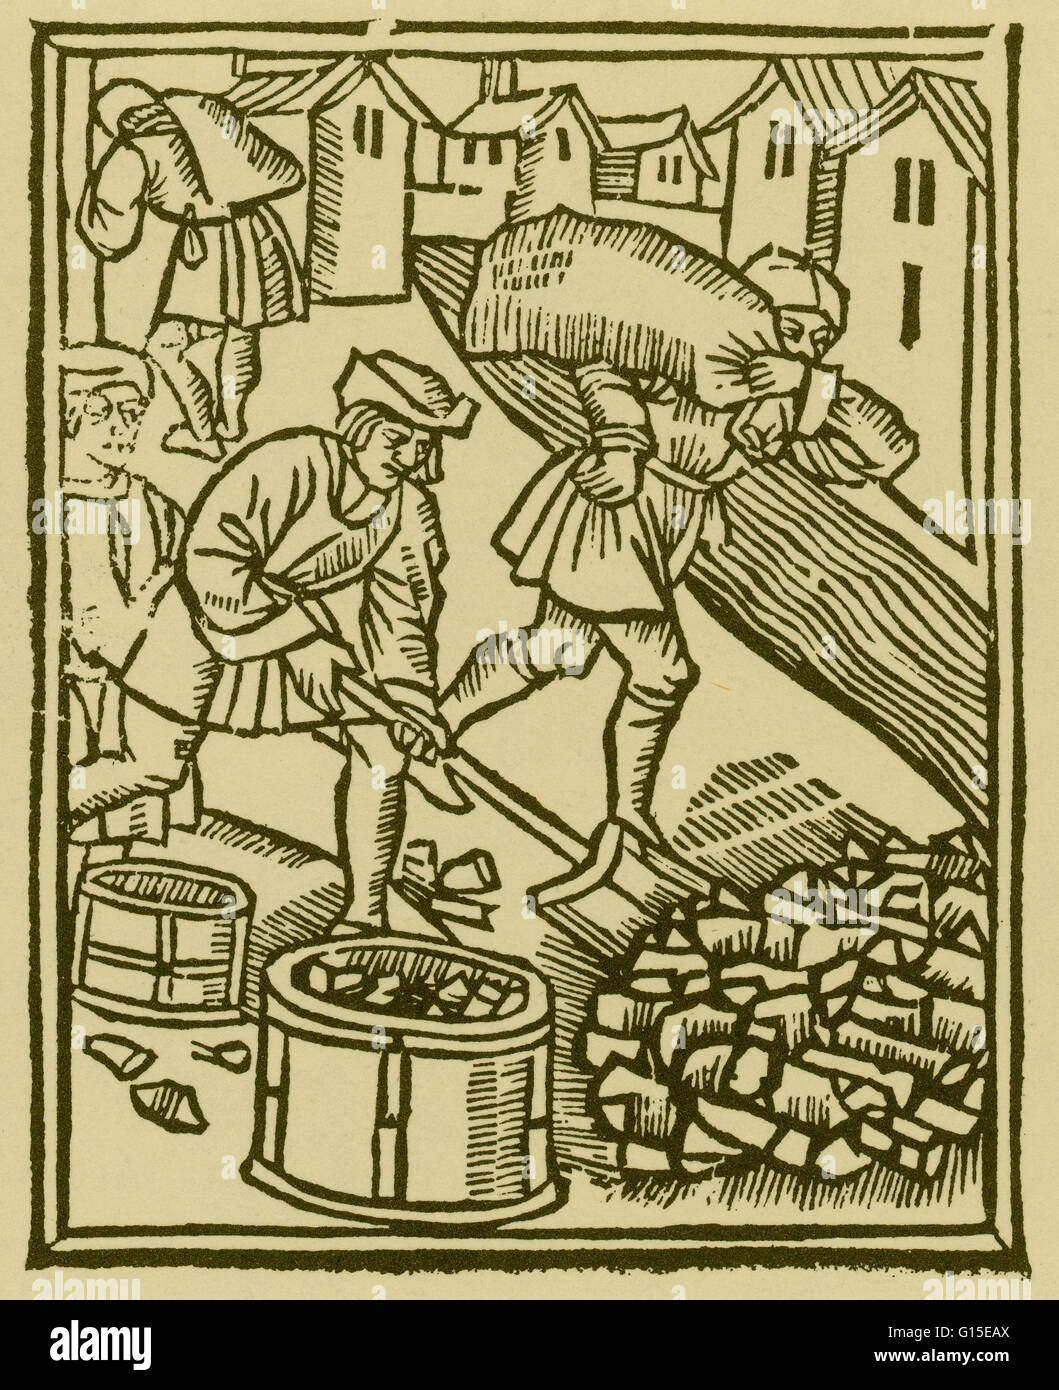 Scenes of a trade: charcoal burners. Woodcut, 1500/01. From Les Ordonnances de Paris. A Charcoal Burner's job was a humble one, but one that in pre industrial society was extremely important none the less. For centuries many trades depended on charcoal as Stock Photo